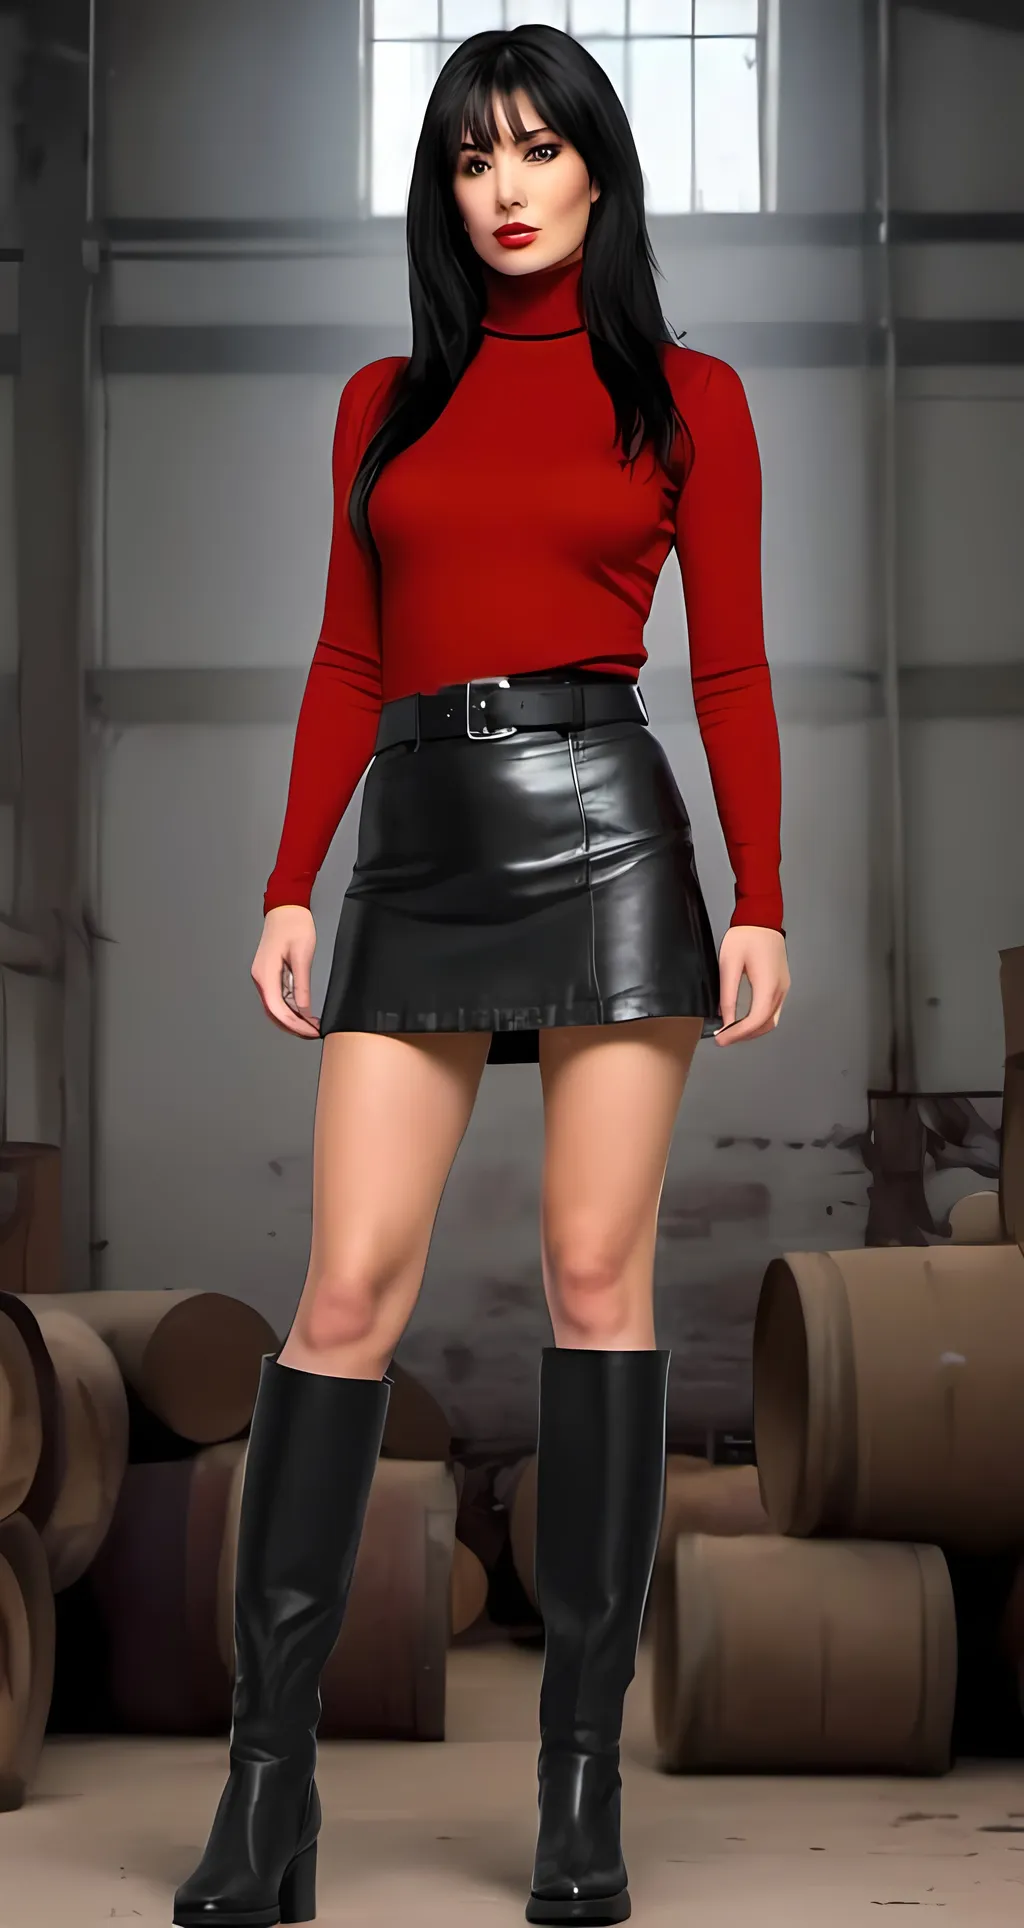 Prompt: red turtleneck, black hair, short black leather skirt with belt, private investigator, hands raised in surrender, knee-high black leather boots, abandoned warehouse setting